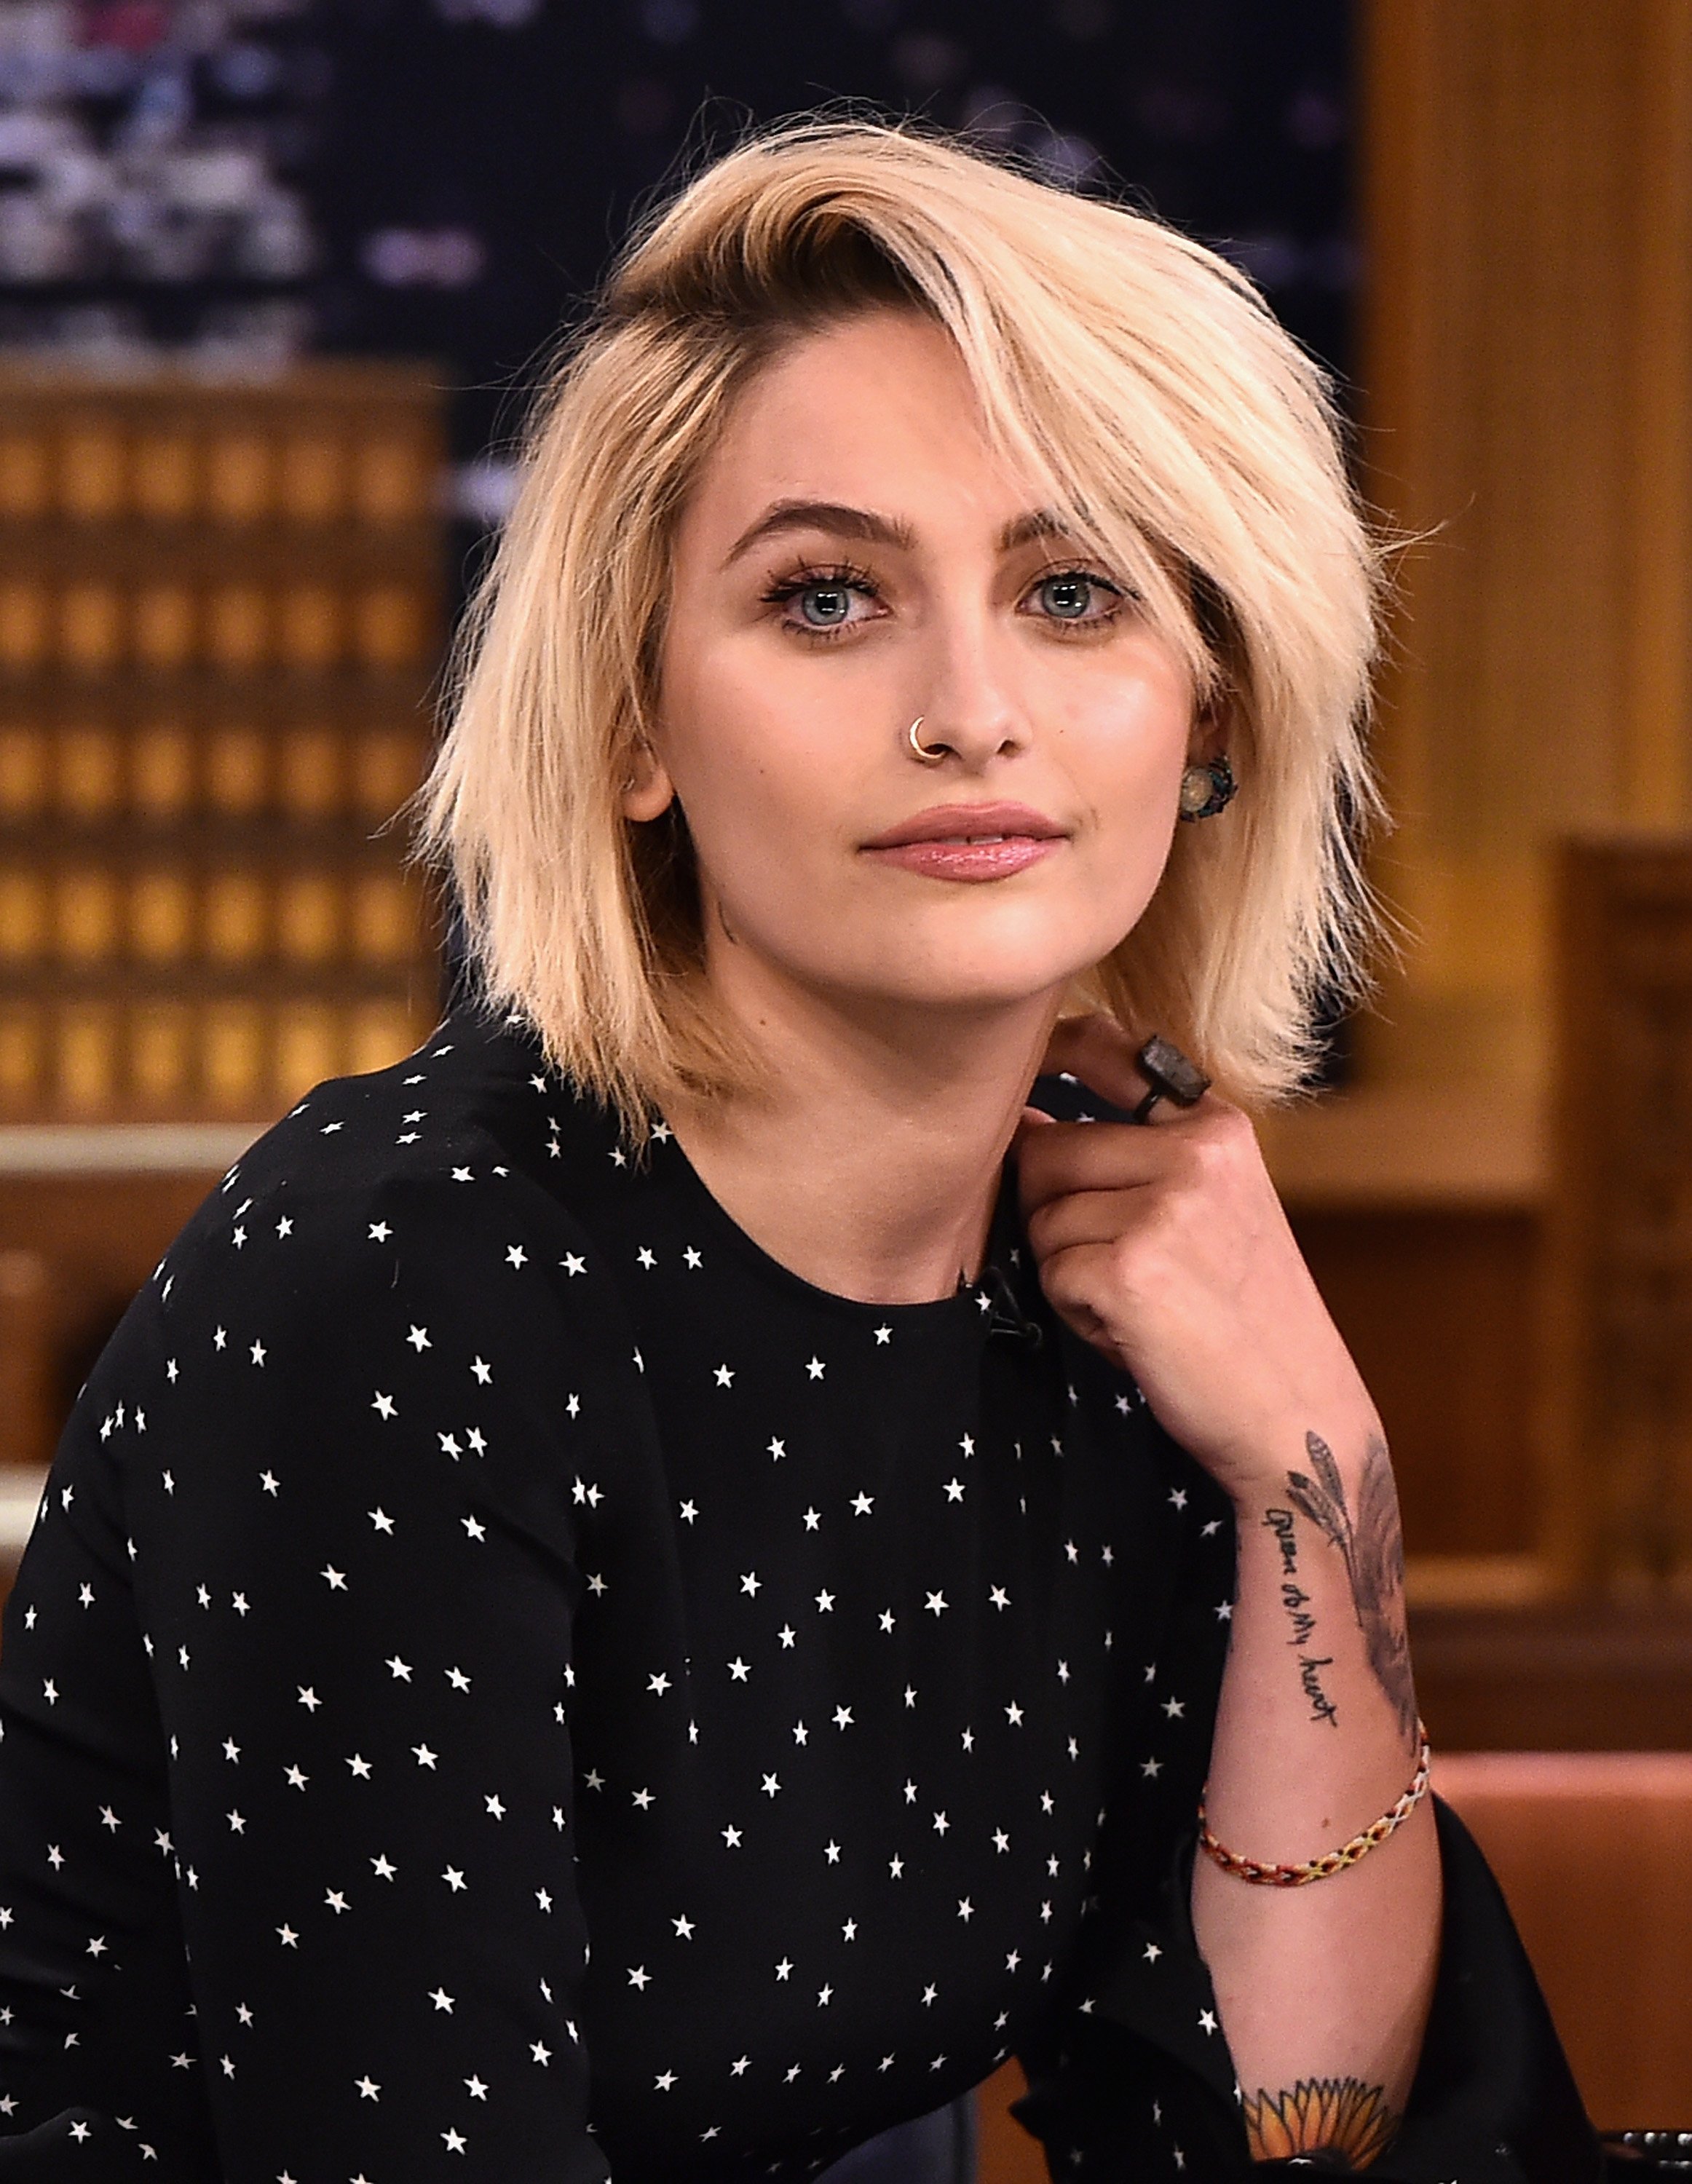 Paris Jackson pictured on "The Tonight Show Starring Jimmy Fallon." 2017, New York City. | Photo: Getty Images